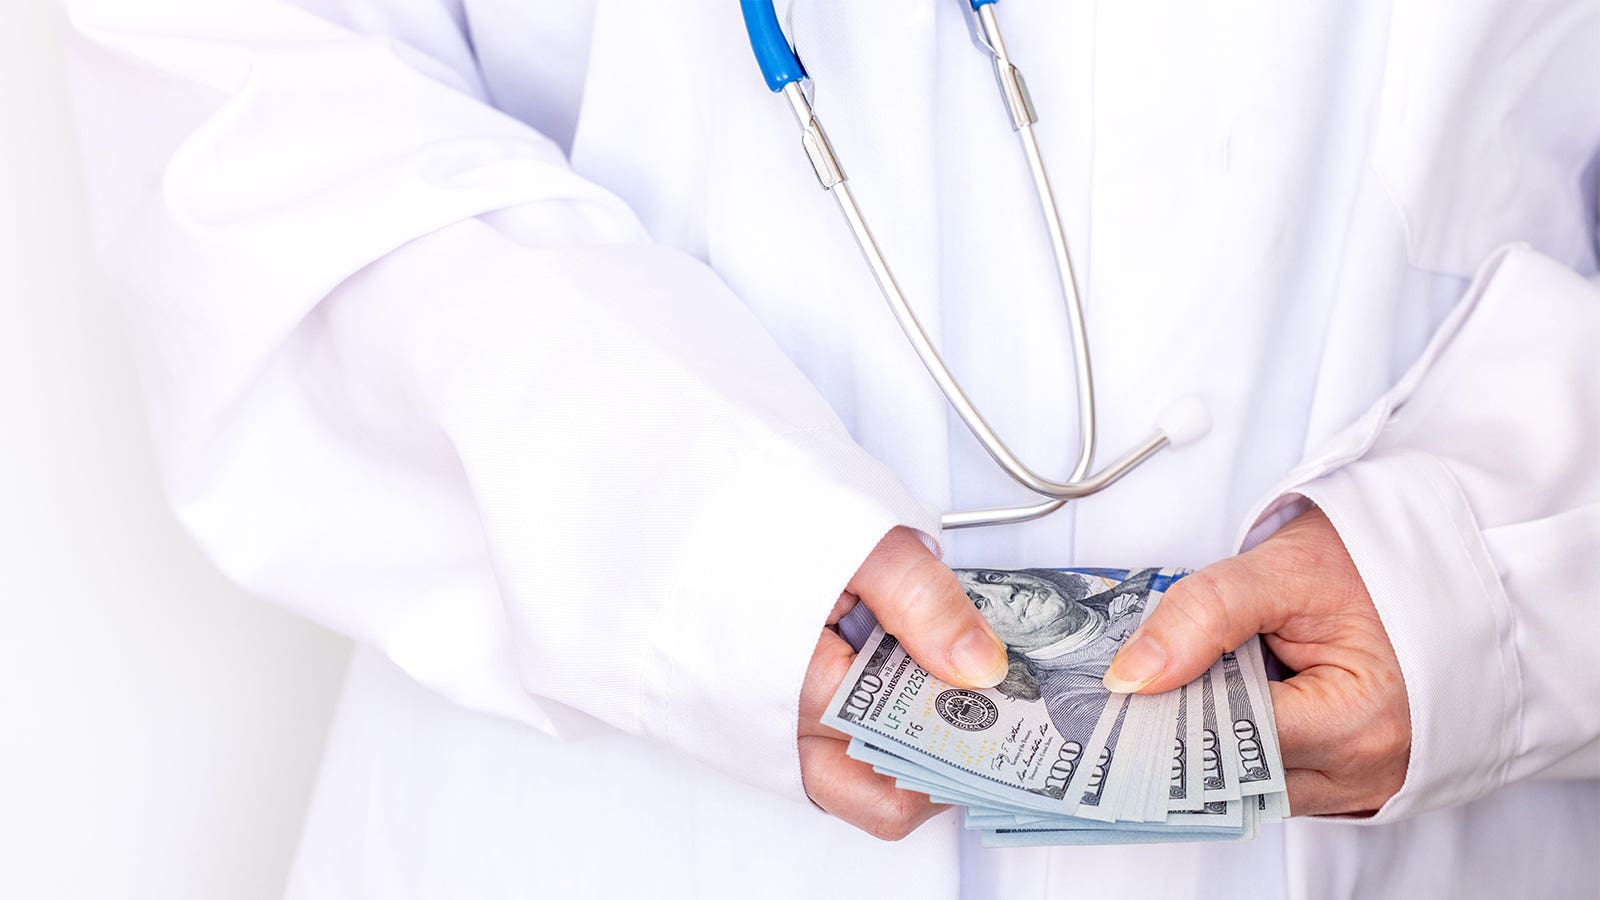 Senate Paper Mulls Alternate choices for Fixing Physician Pay in Price-for-Provider Medicare